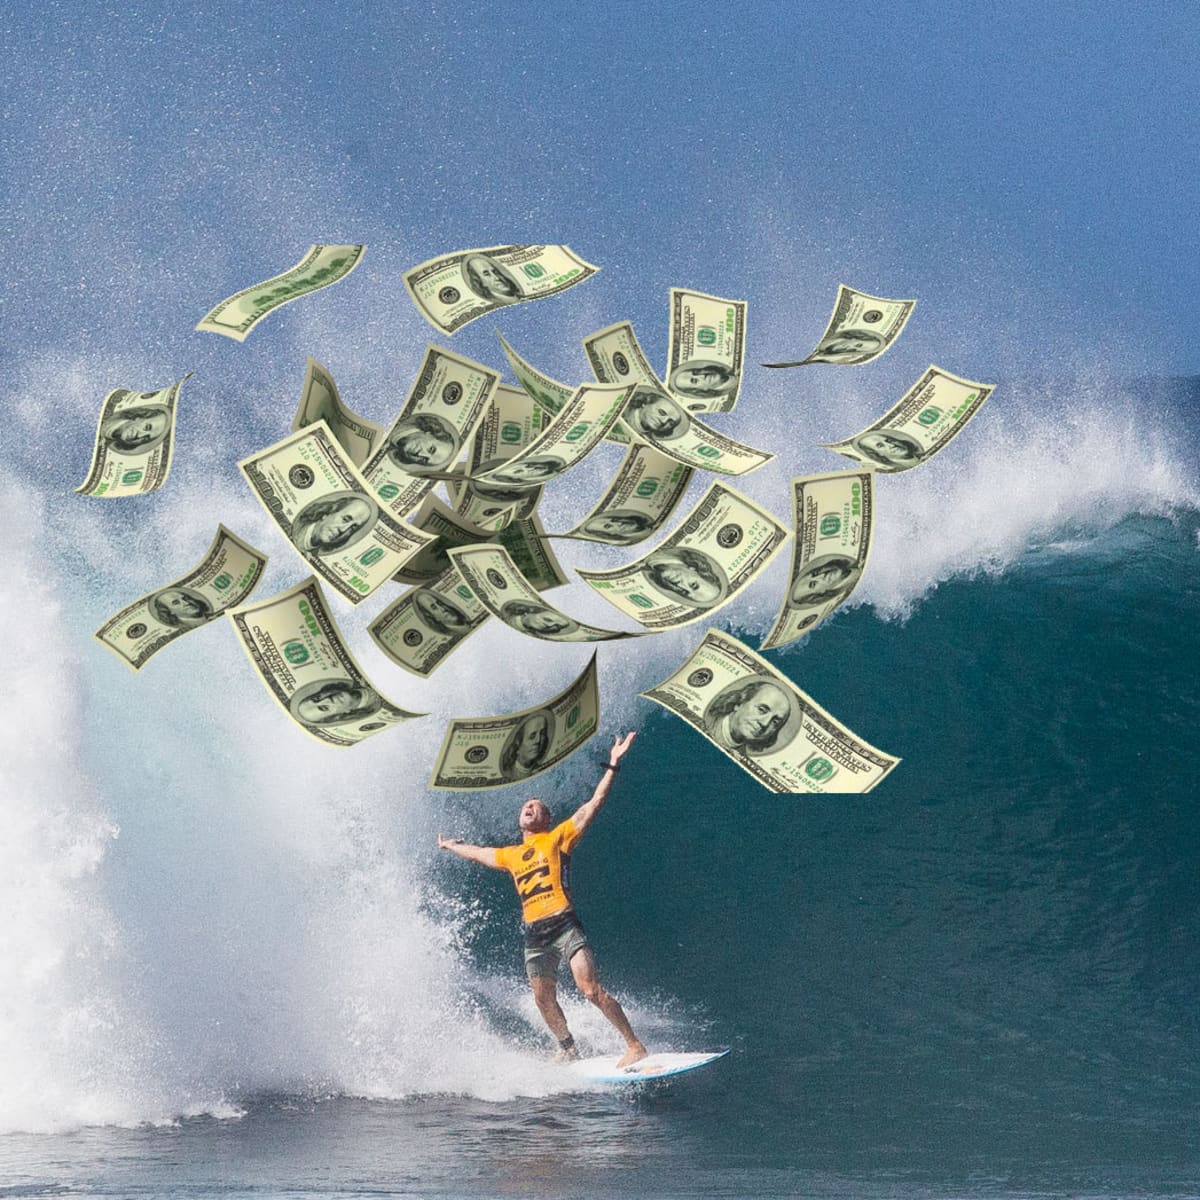 man surfing in breaking wave with dollar bills flying in the air cost of surfing